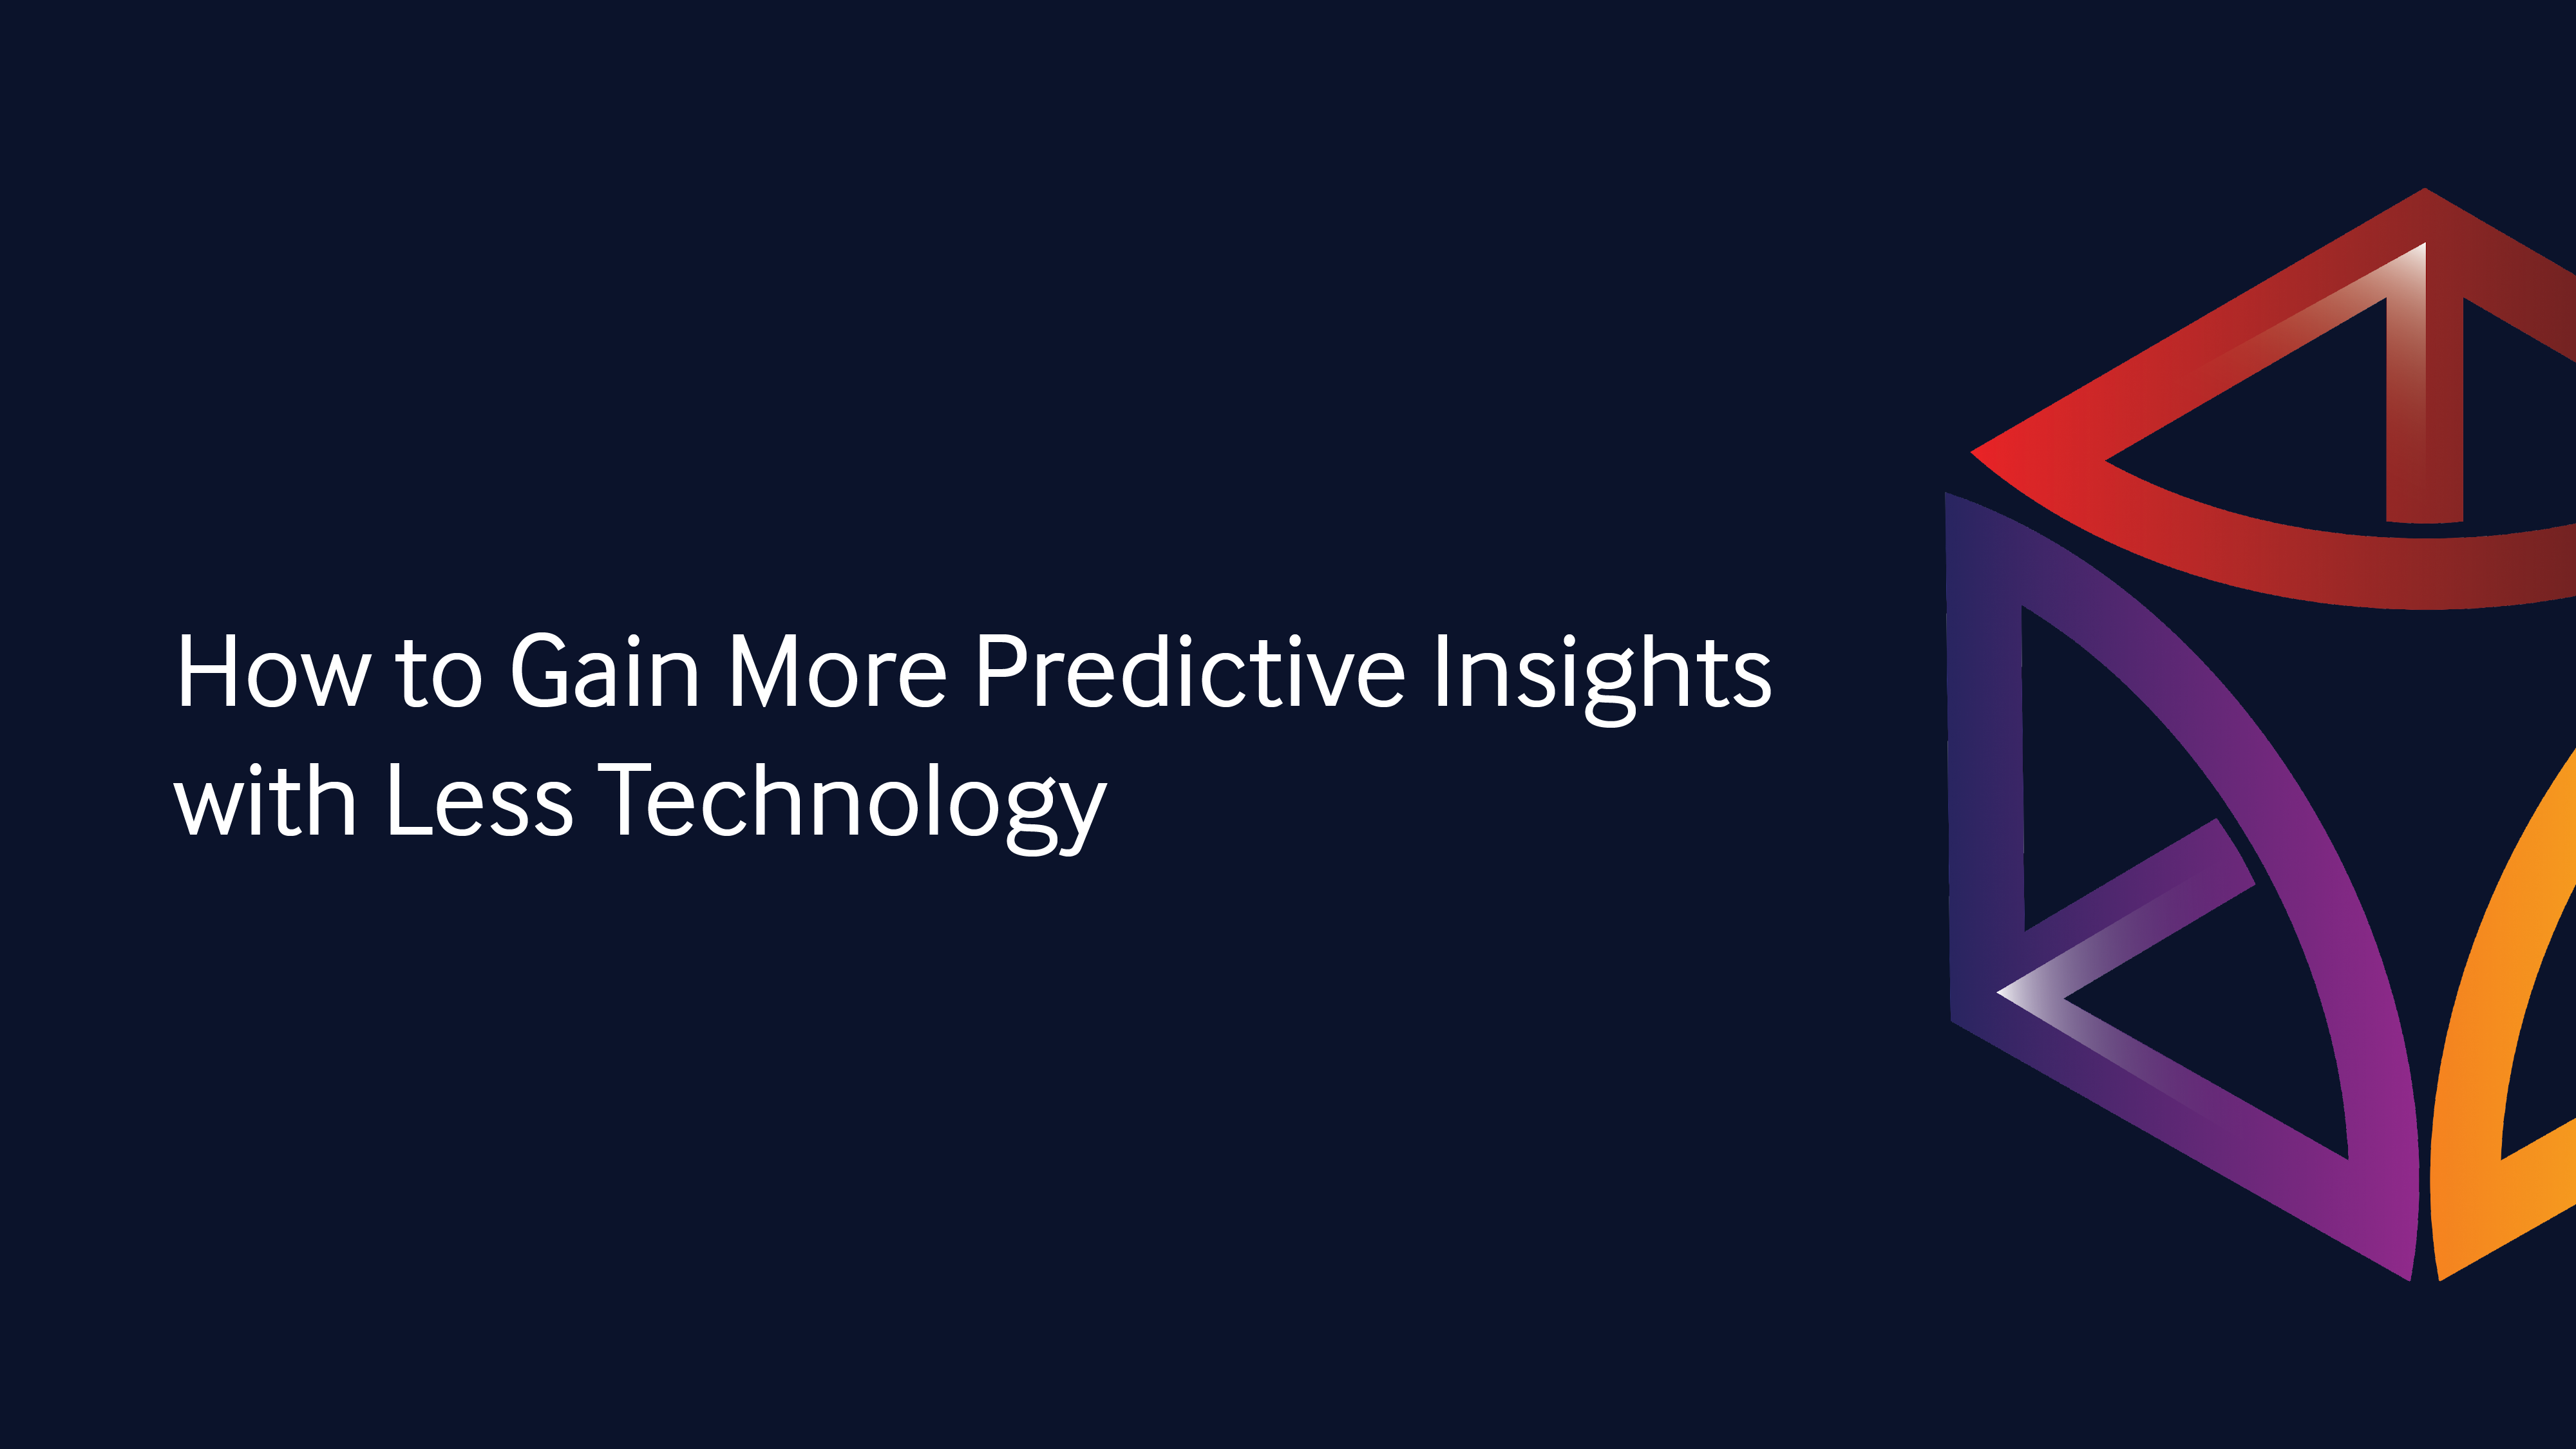 How to Gain More Predictive Insights with Less Technology